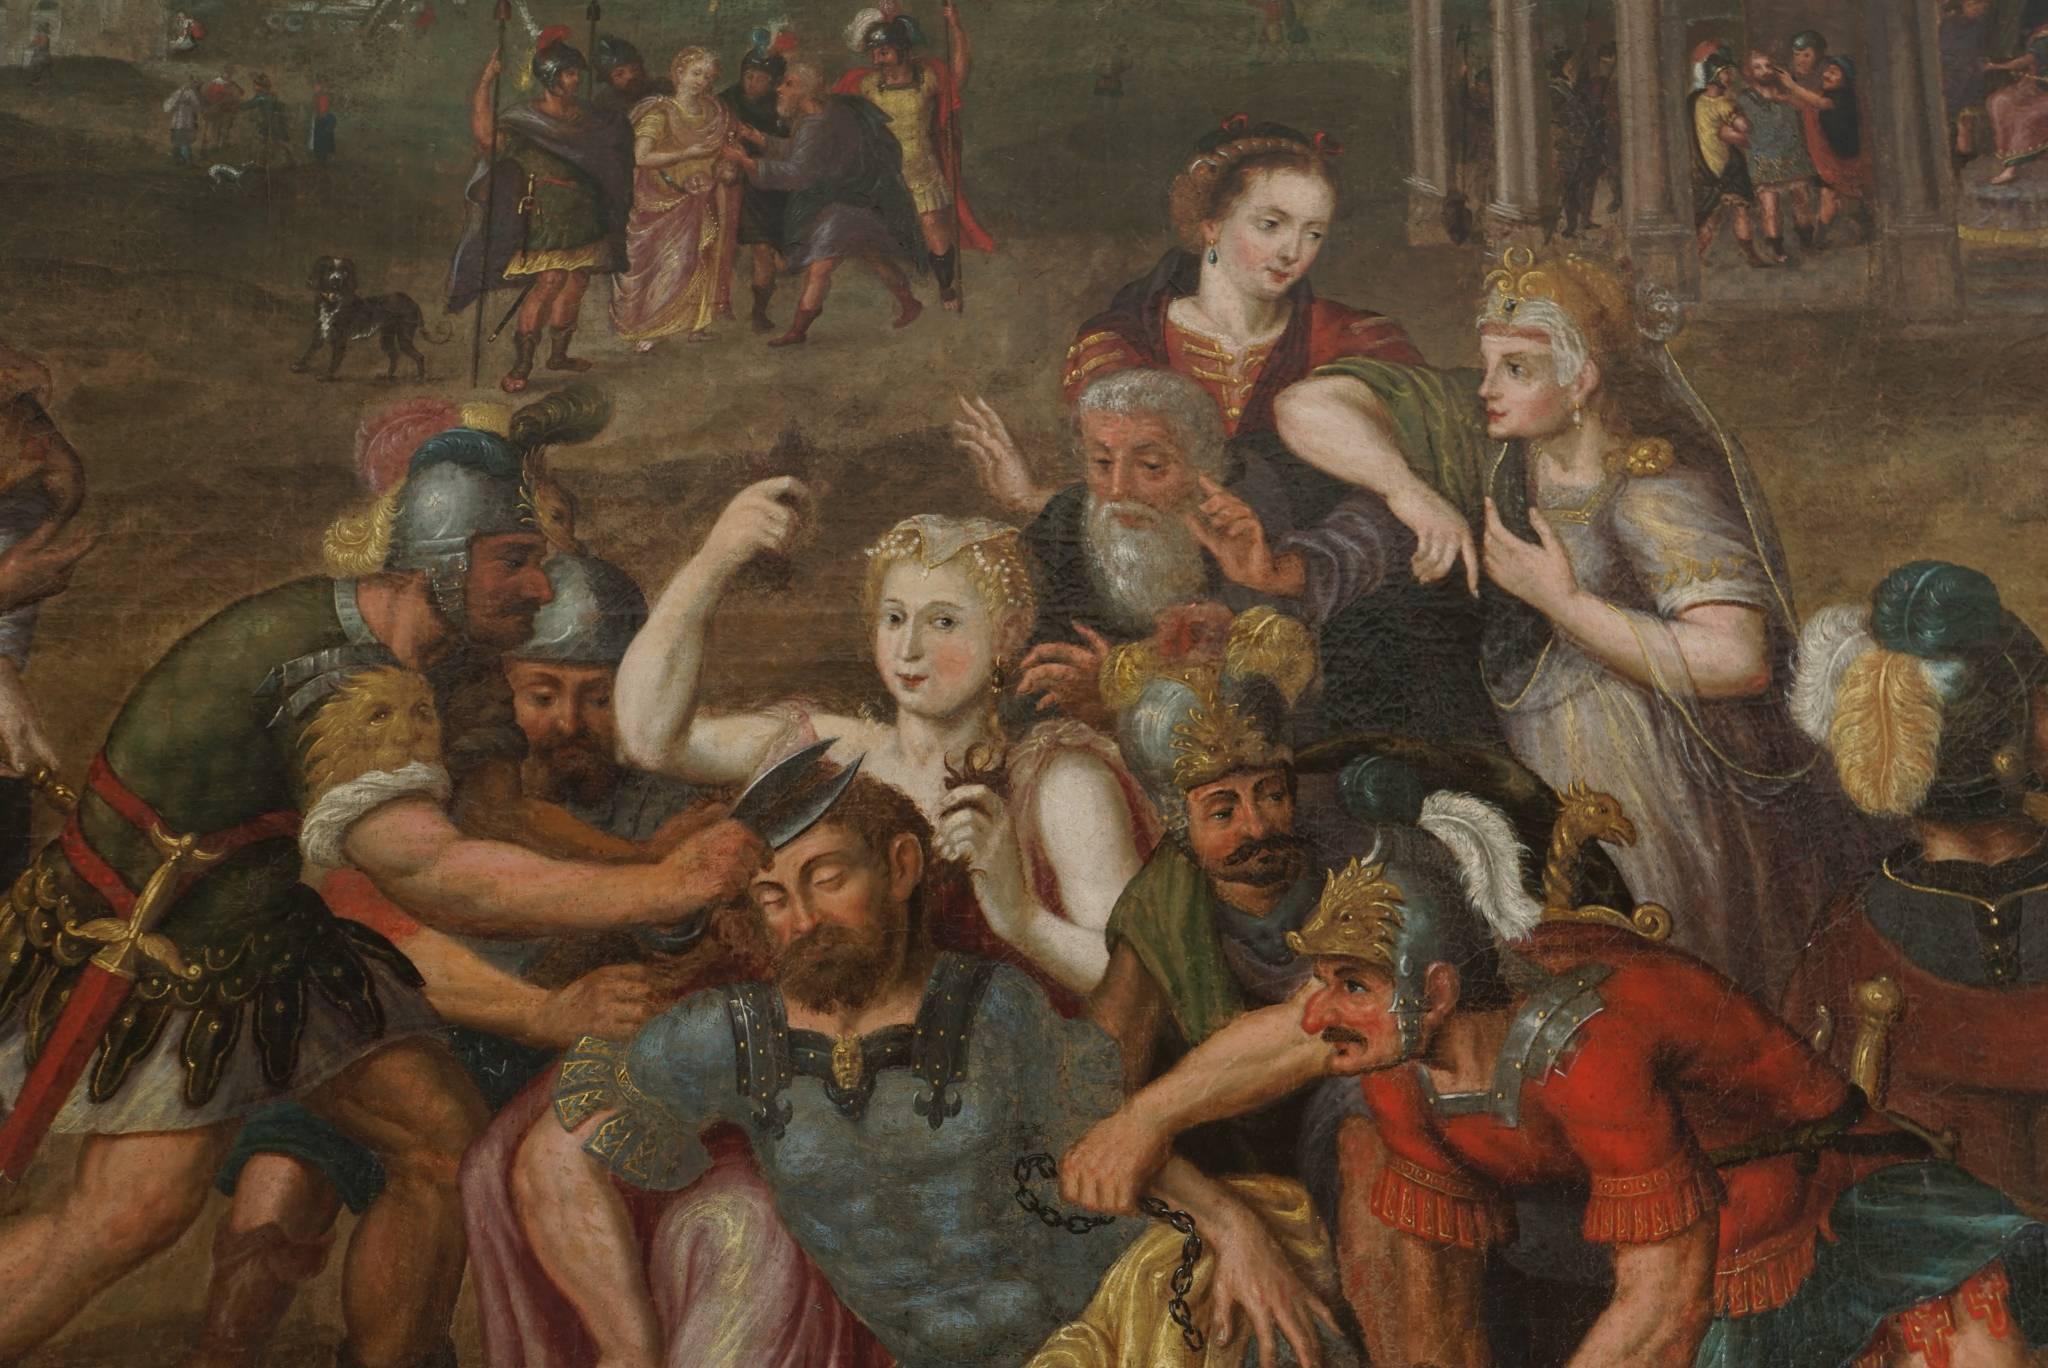 Flemish, circa 1600, old master oil on canvas of large-scale by a follower of Frans Floris the Elder (1517-1570) depicting the Biblical story of Samson and Delilah with soldiers, courtiers, royalty, and other figures in landscape and architectural